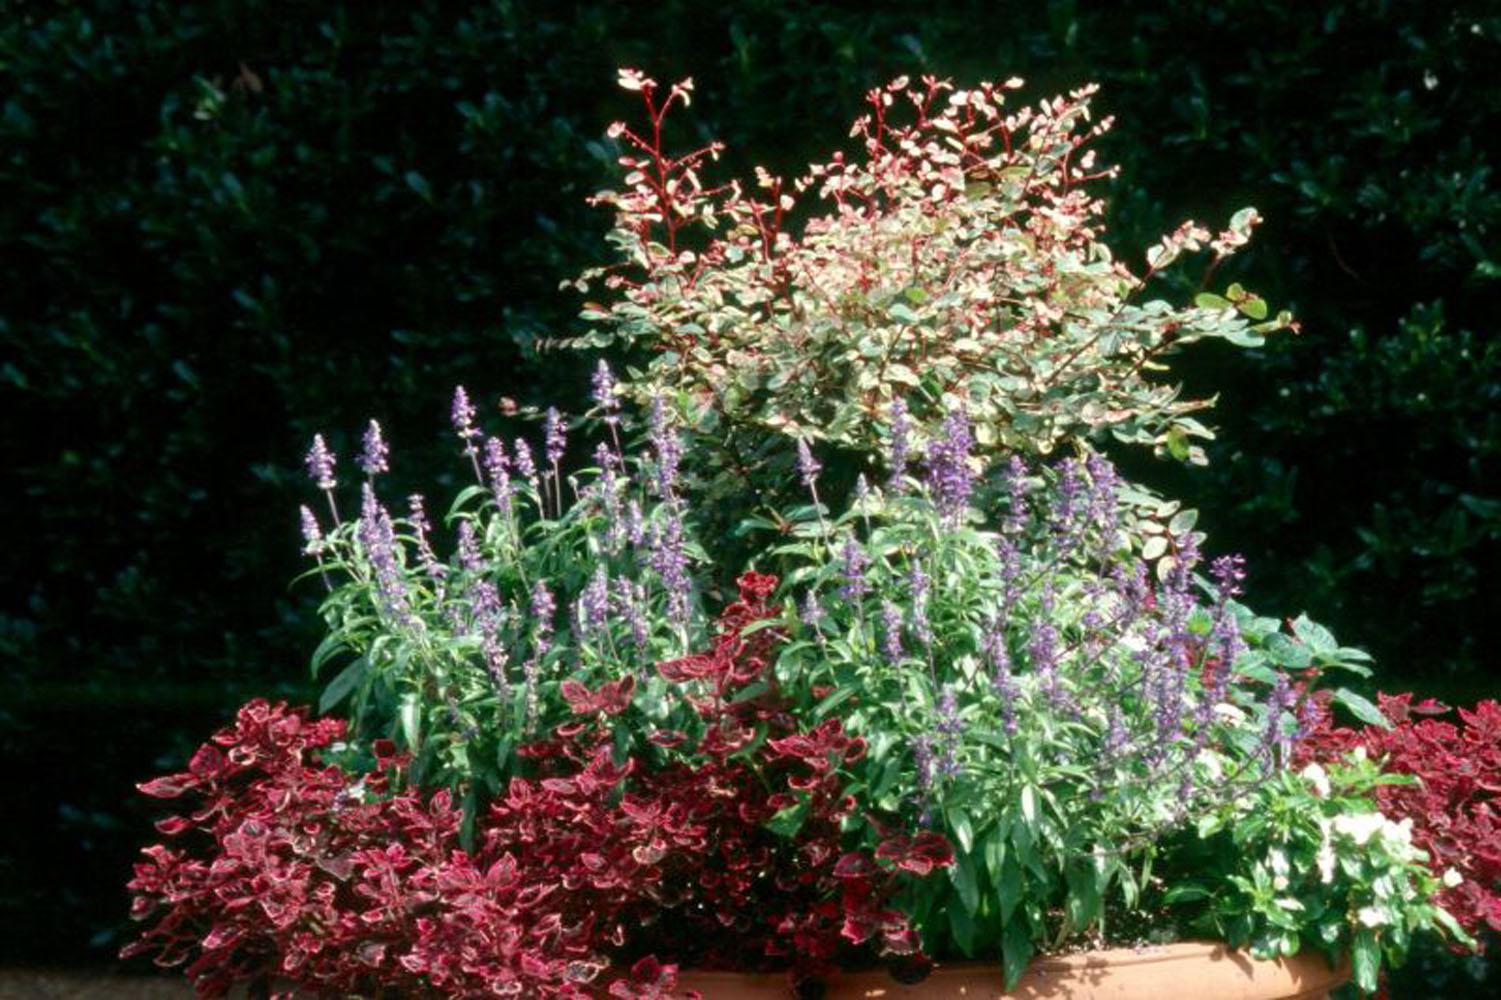 The snow bush is sought after for its colorful foliage and unique habit rather than its bloom. It produces slender, burgundy-colored zigzagging stems with leaves painted in green, cream and pink.